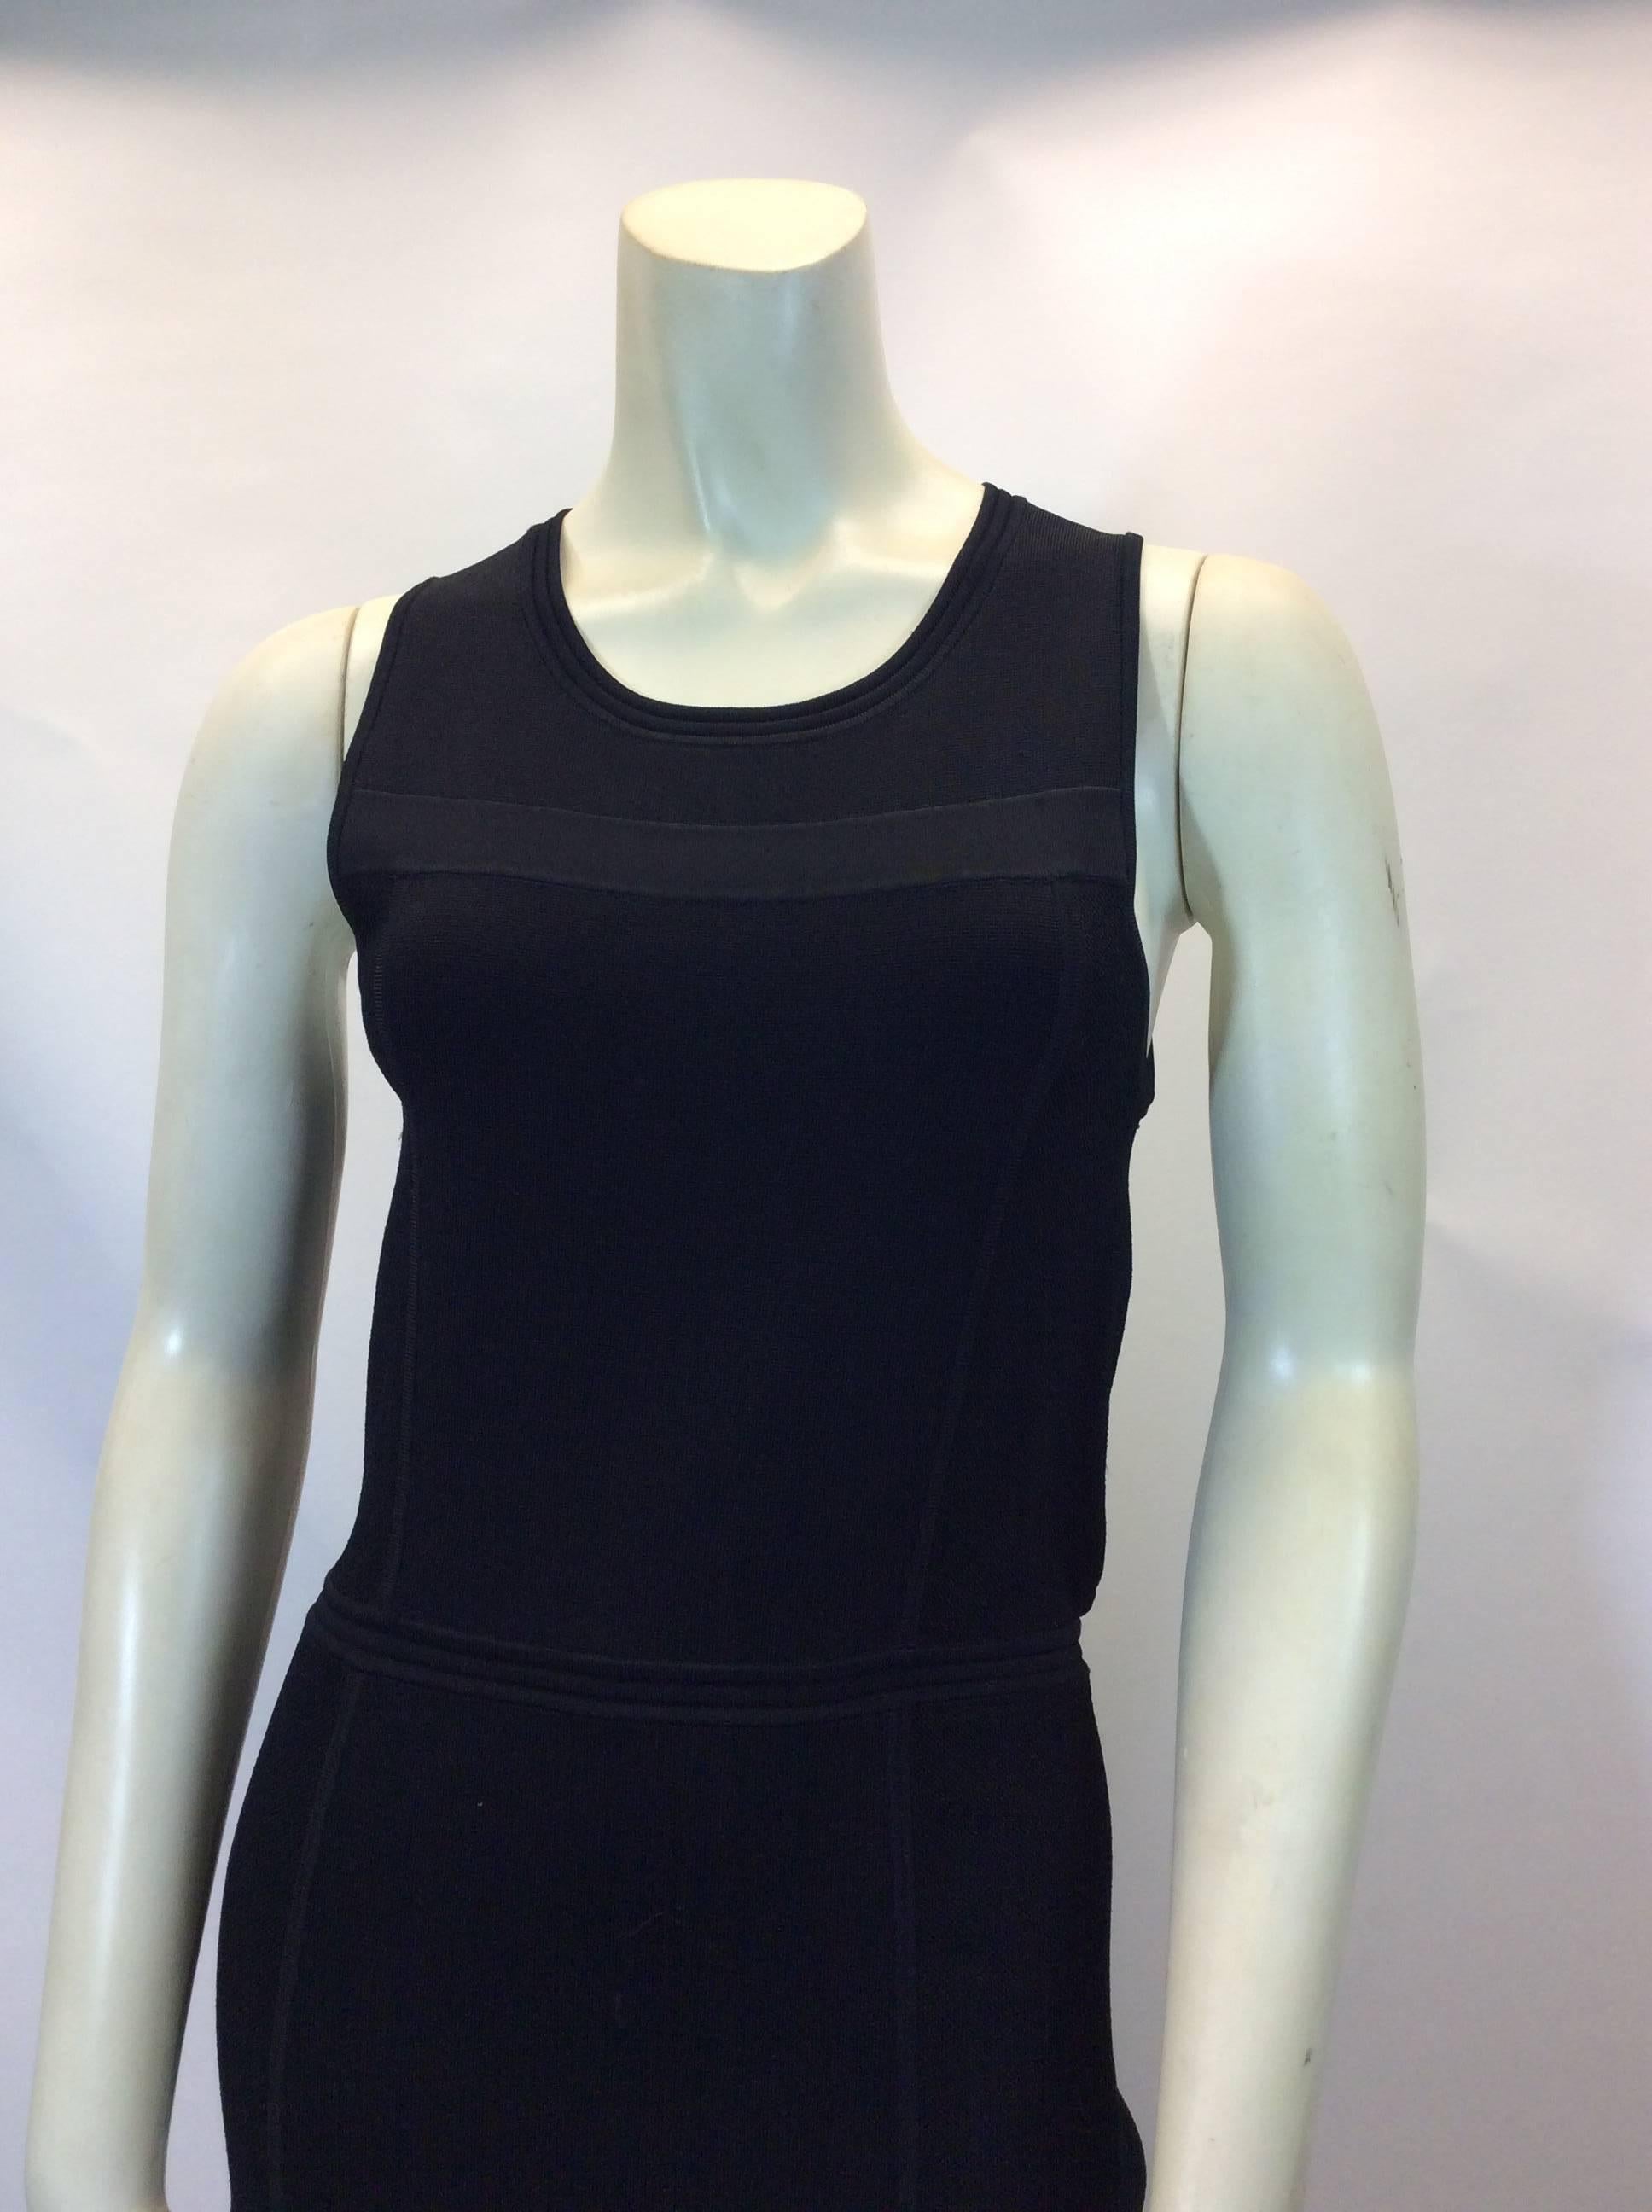 ALC Black Knit Open Back Dress 
Snap buttons in the back with two cut outs
Sleeveless style
$199
Made in China 
Size large 
Material has a fair amount of stretch to it! 
